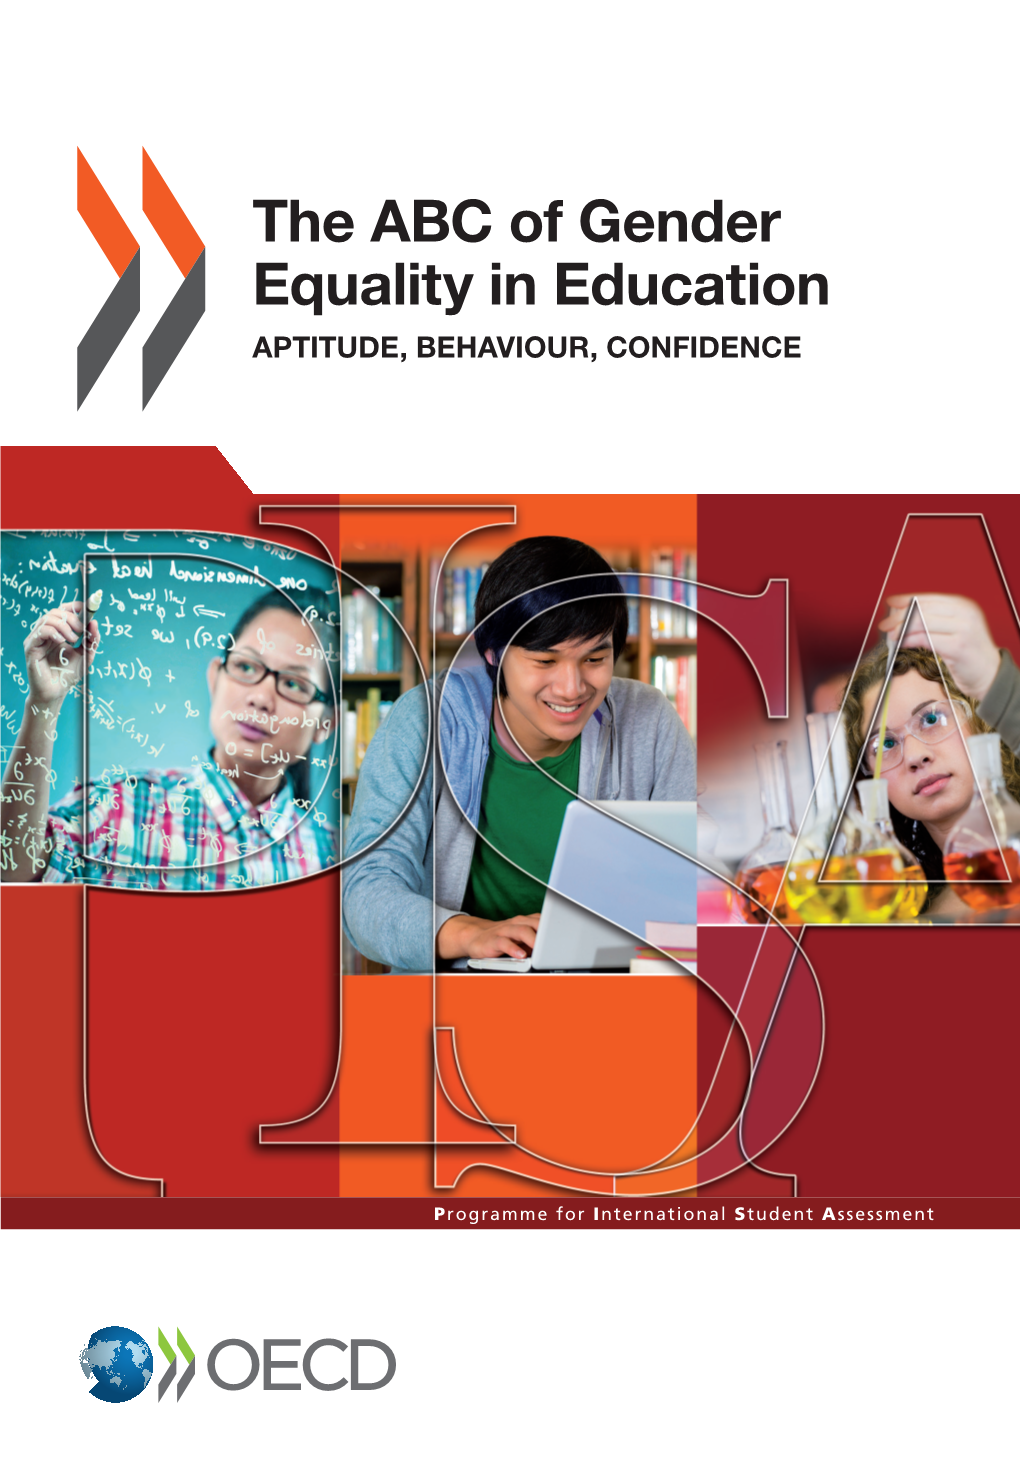 The ABC of Gender Equality in Education Aptitude, Behaviour, Confidence